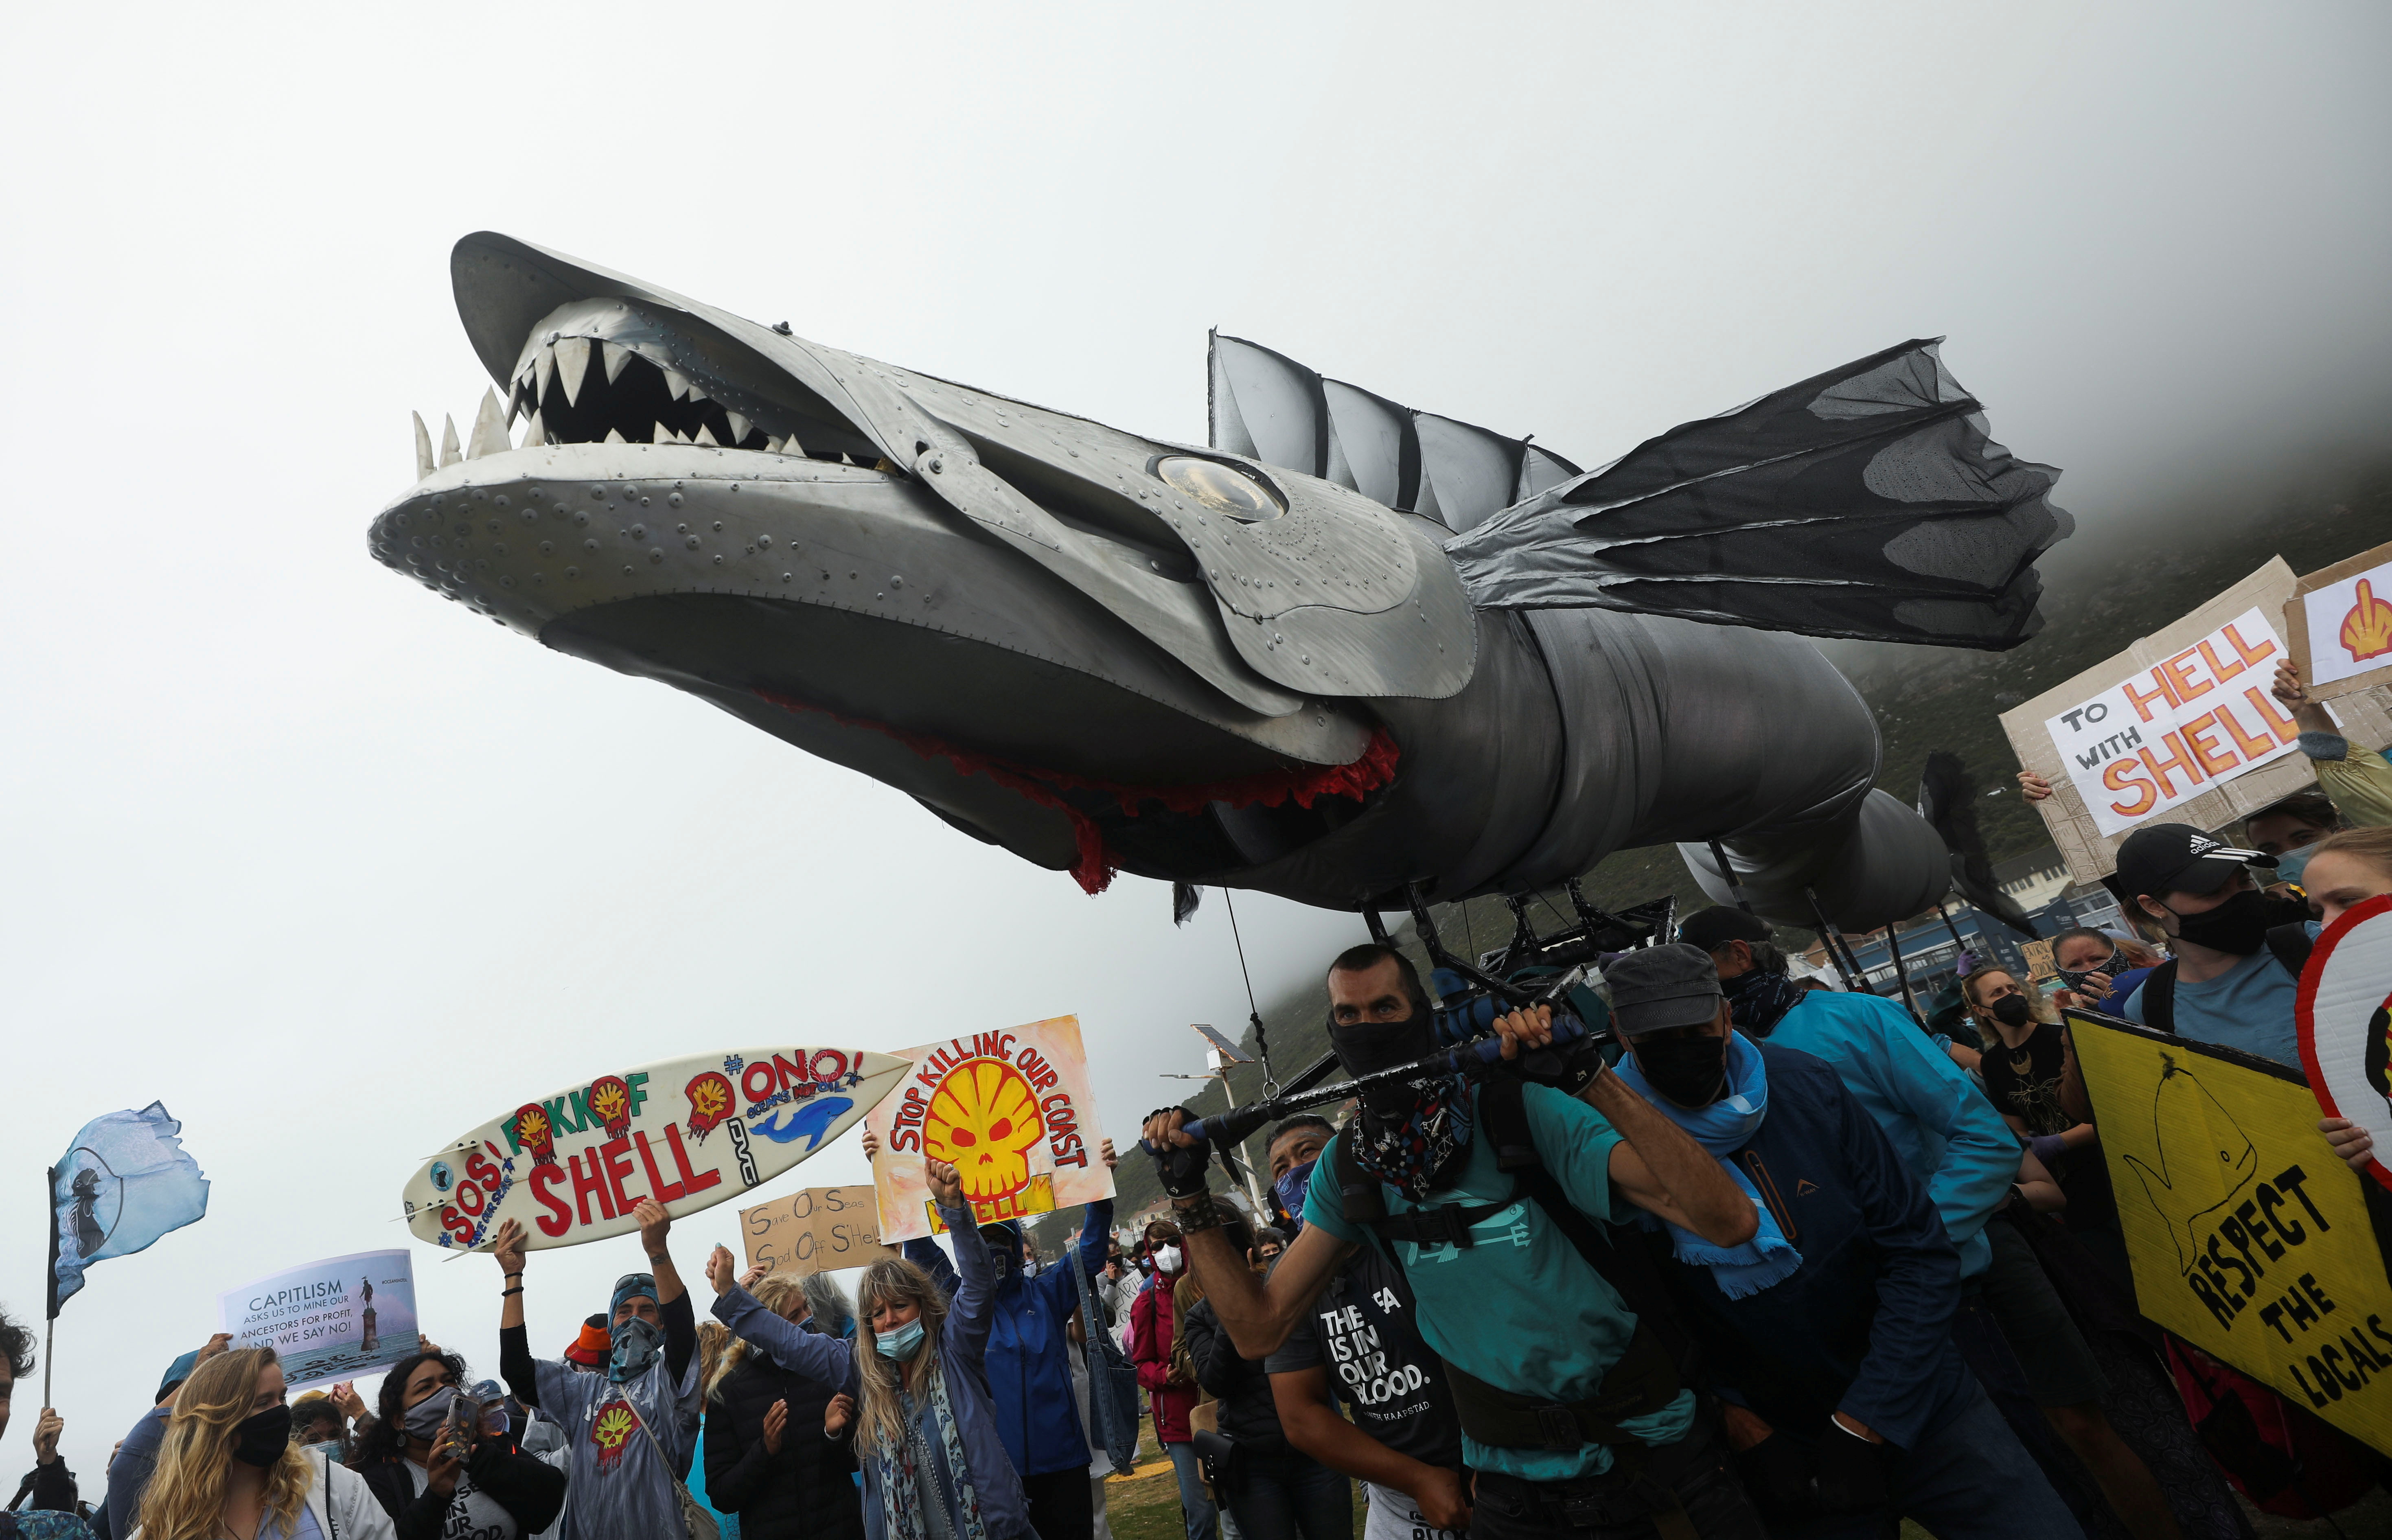 Protestors carry a huge fish puppet as they demonstrate against oil major Royal Dutch Shell's plans to start seismic surveys to explore for petroleum systems off the country's popular Wild Coast, at Muizenberg beach in Cape Town, South Africa, December 5. 2021. REUTERS/Mike Hutchings